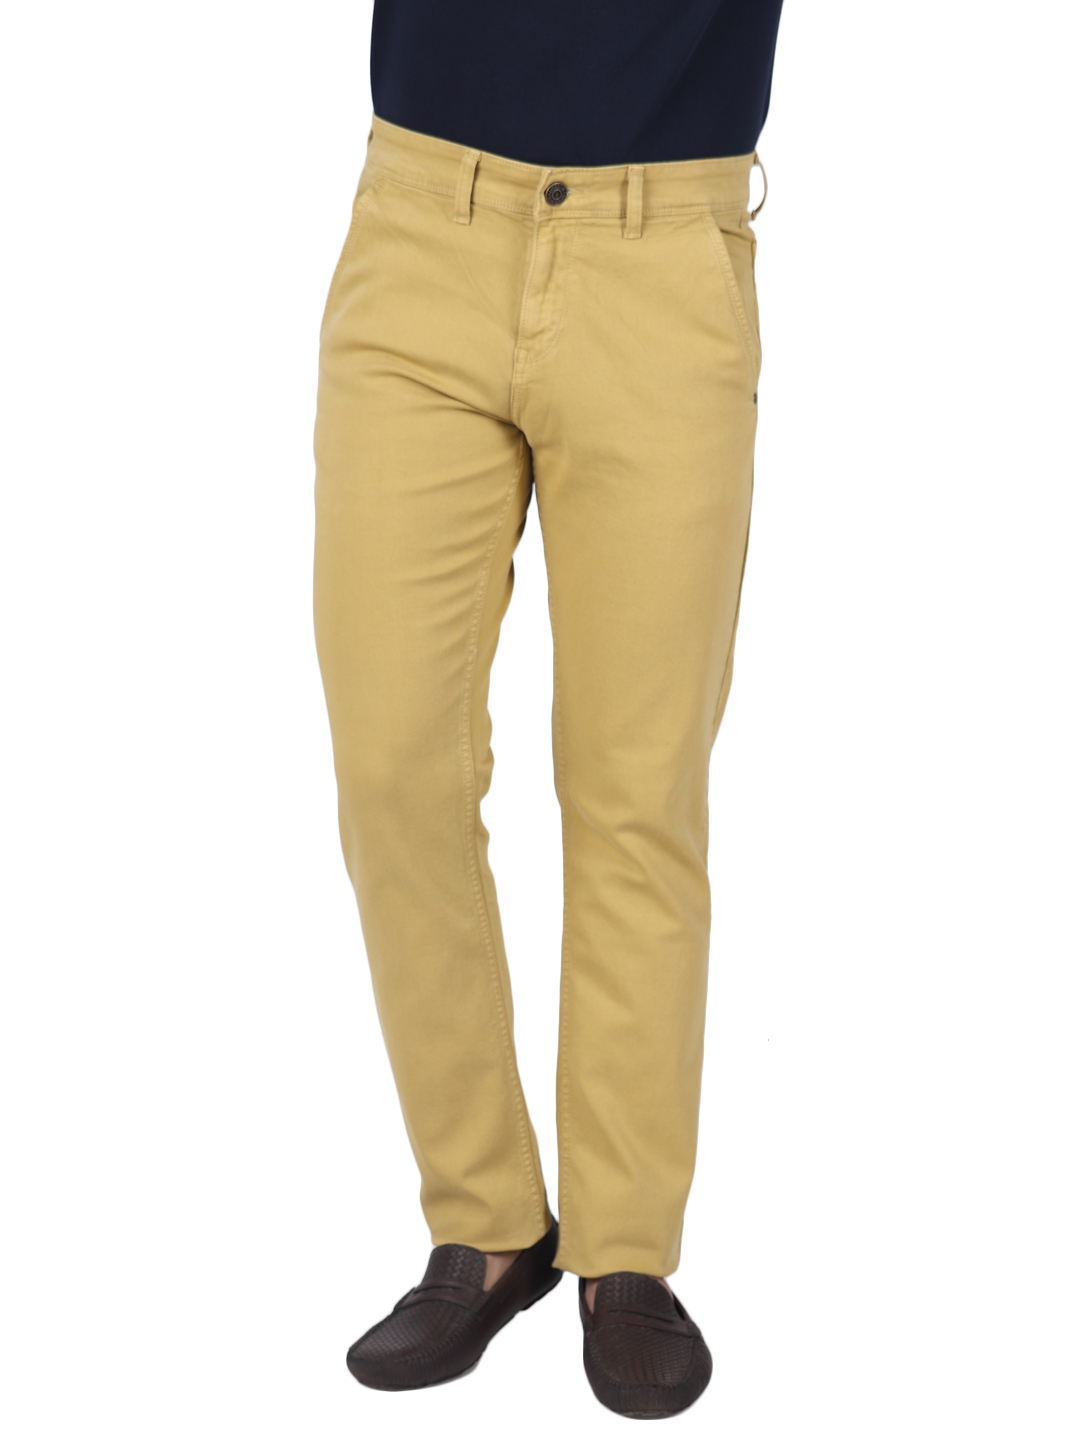 D'cot by Donear | D'cot by Donear Mens Brown Cotton Jeans